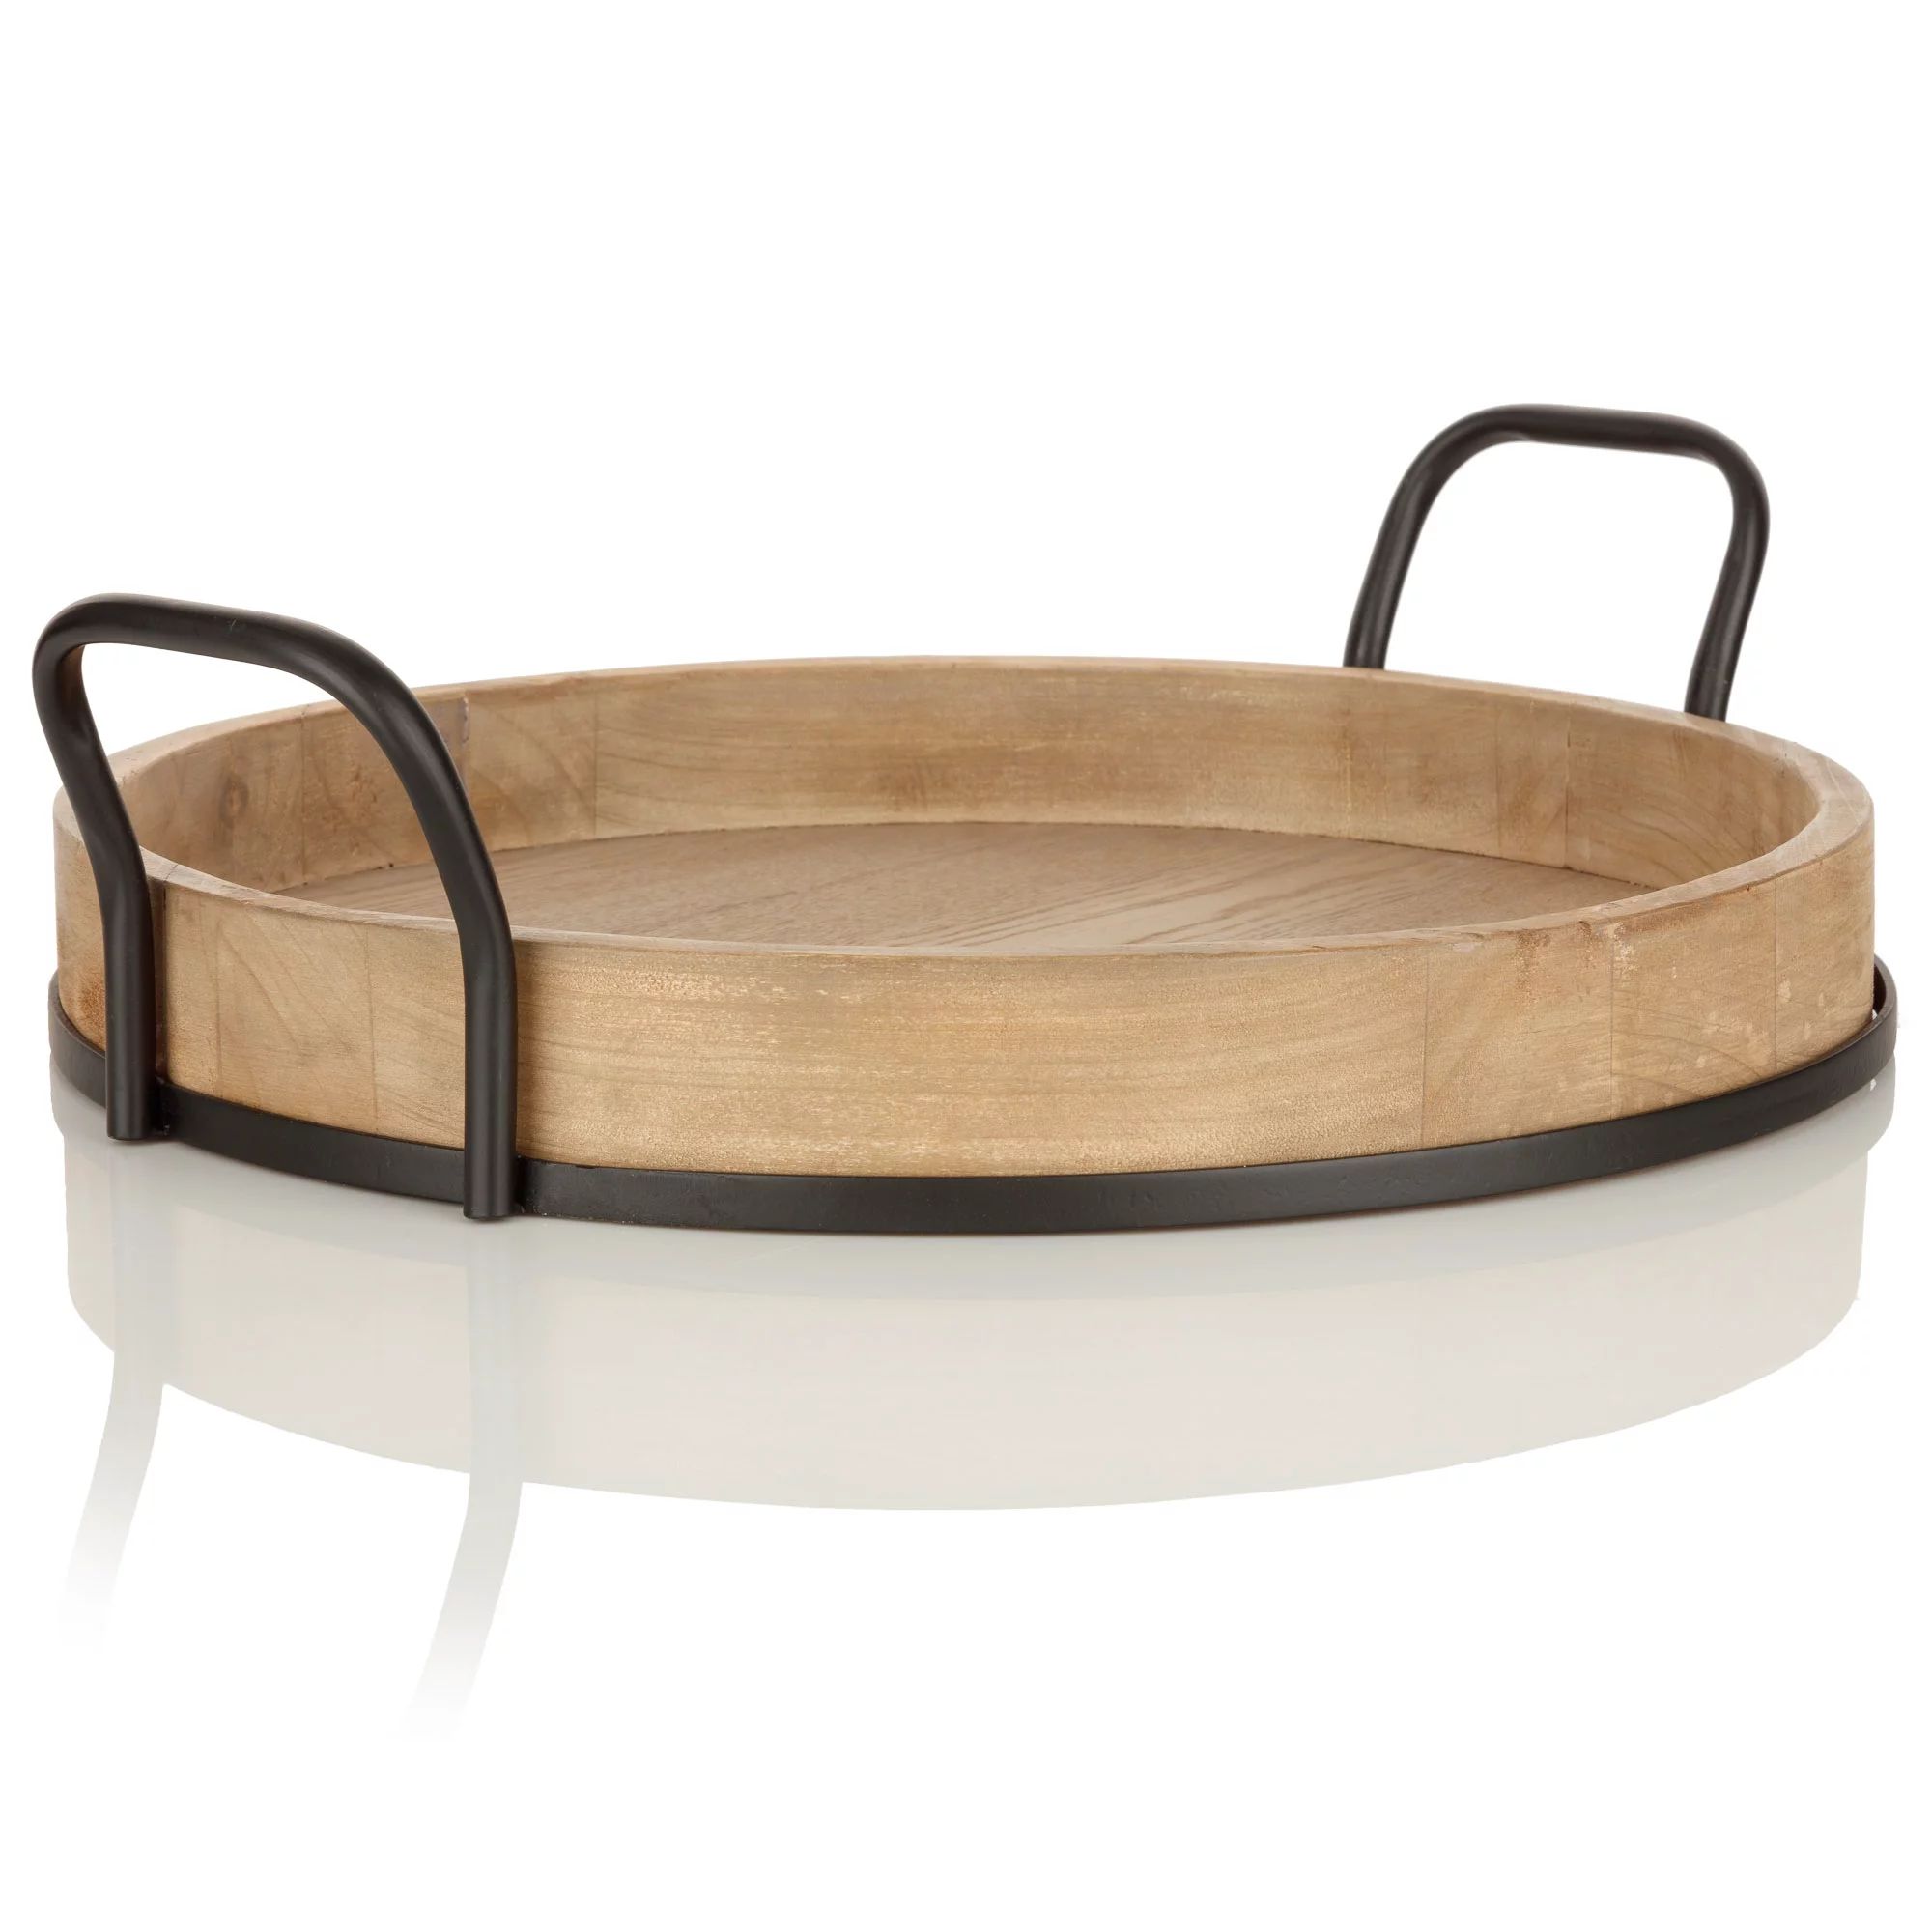 Better Homes & Gardens Round Rustic Brown Wood Serving Tray with Metal Handles, 18.5"x17" | Walmart (US)